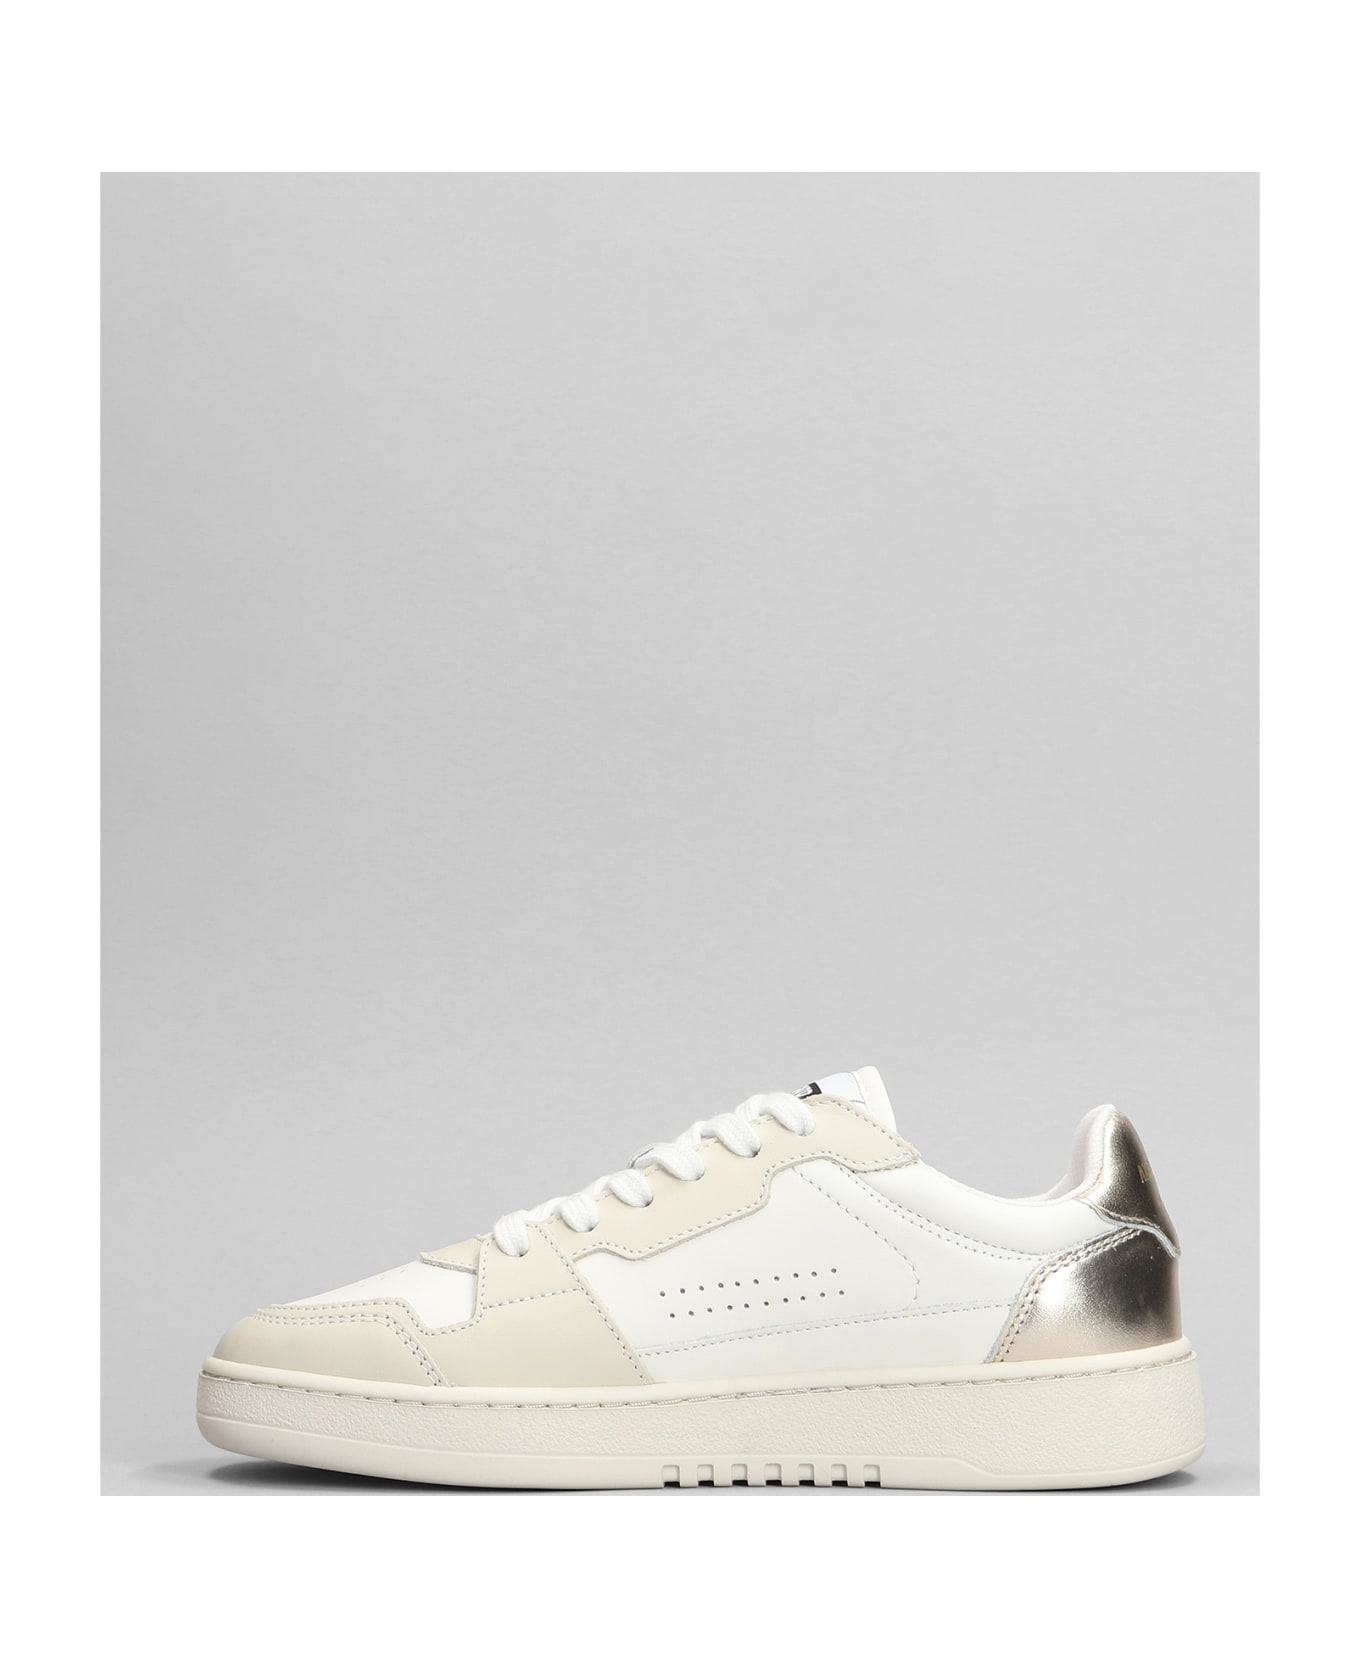 Axel Arigato Dice Lo Sneaker Sneakers In White Suede And Leather - white